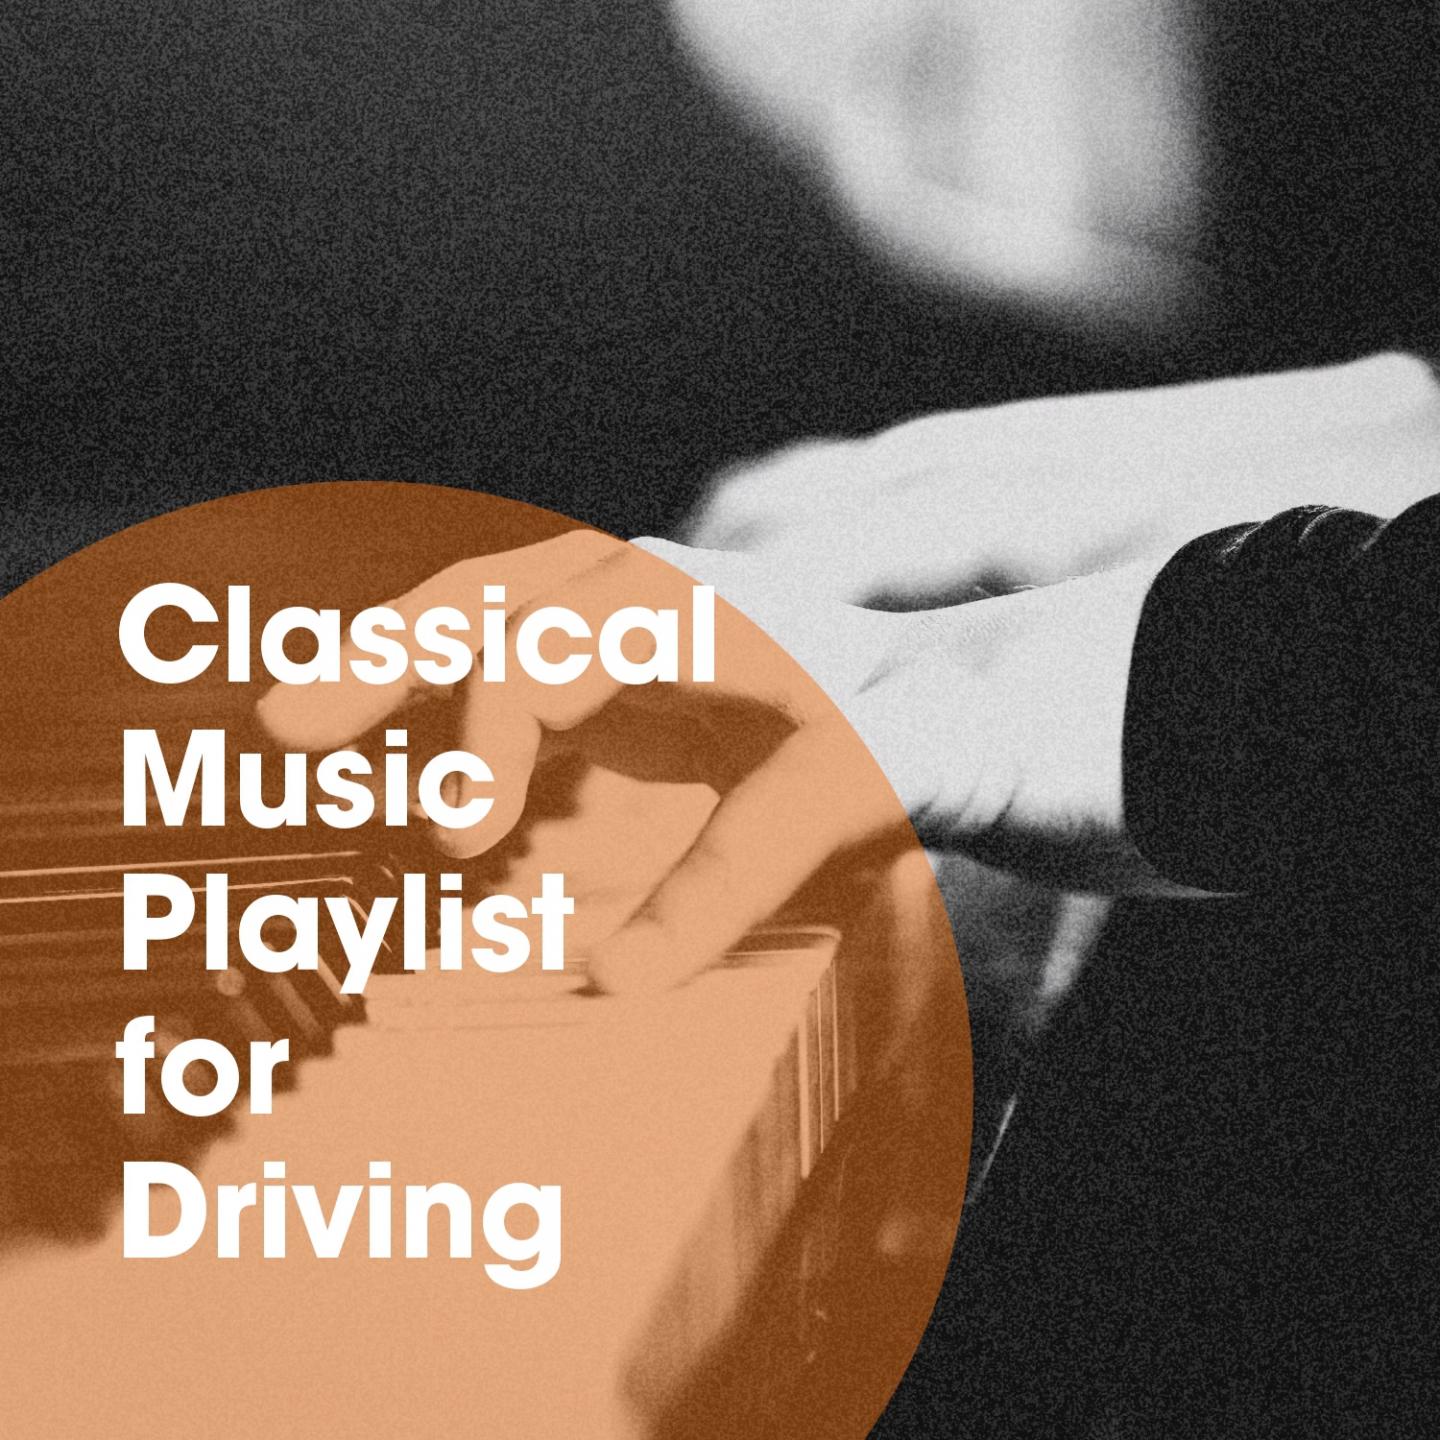 Classical Music Playlist for Driving